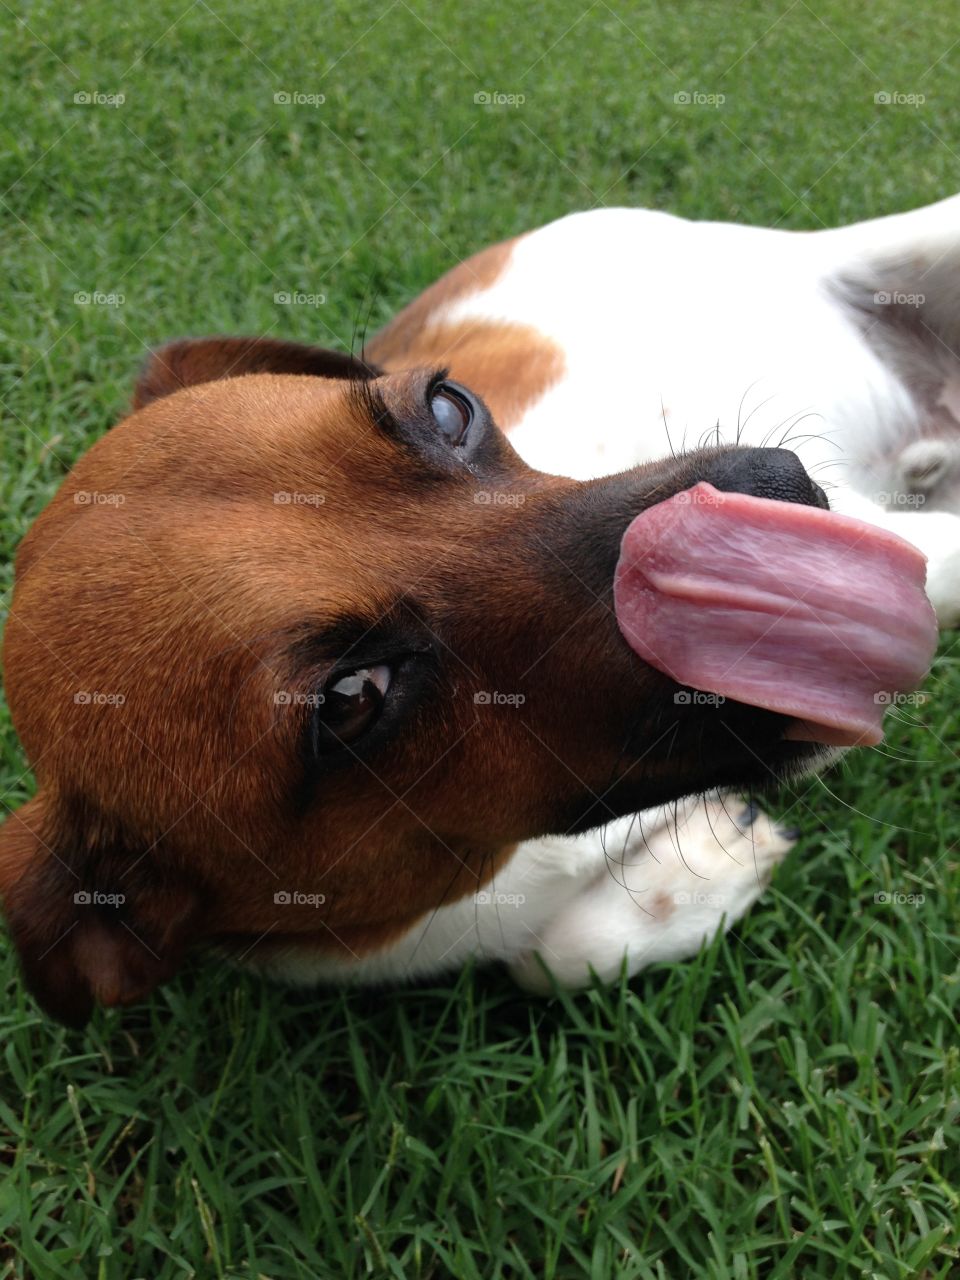 Let me lick you....just once!. Dog in the yard licking face